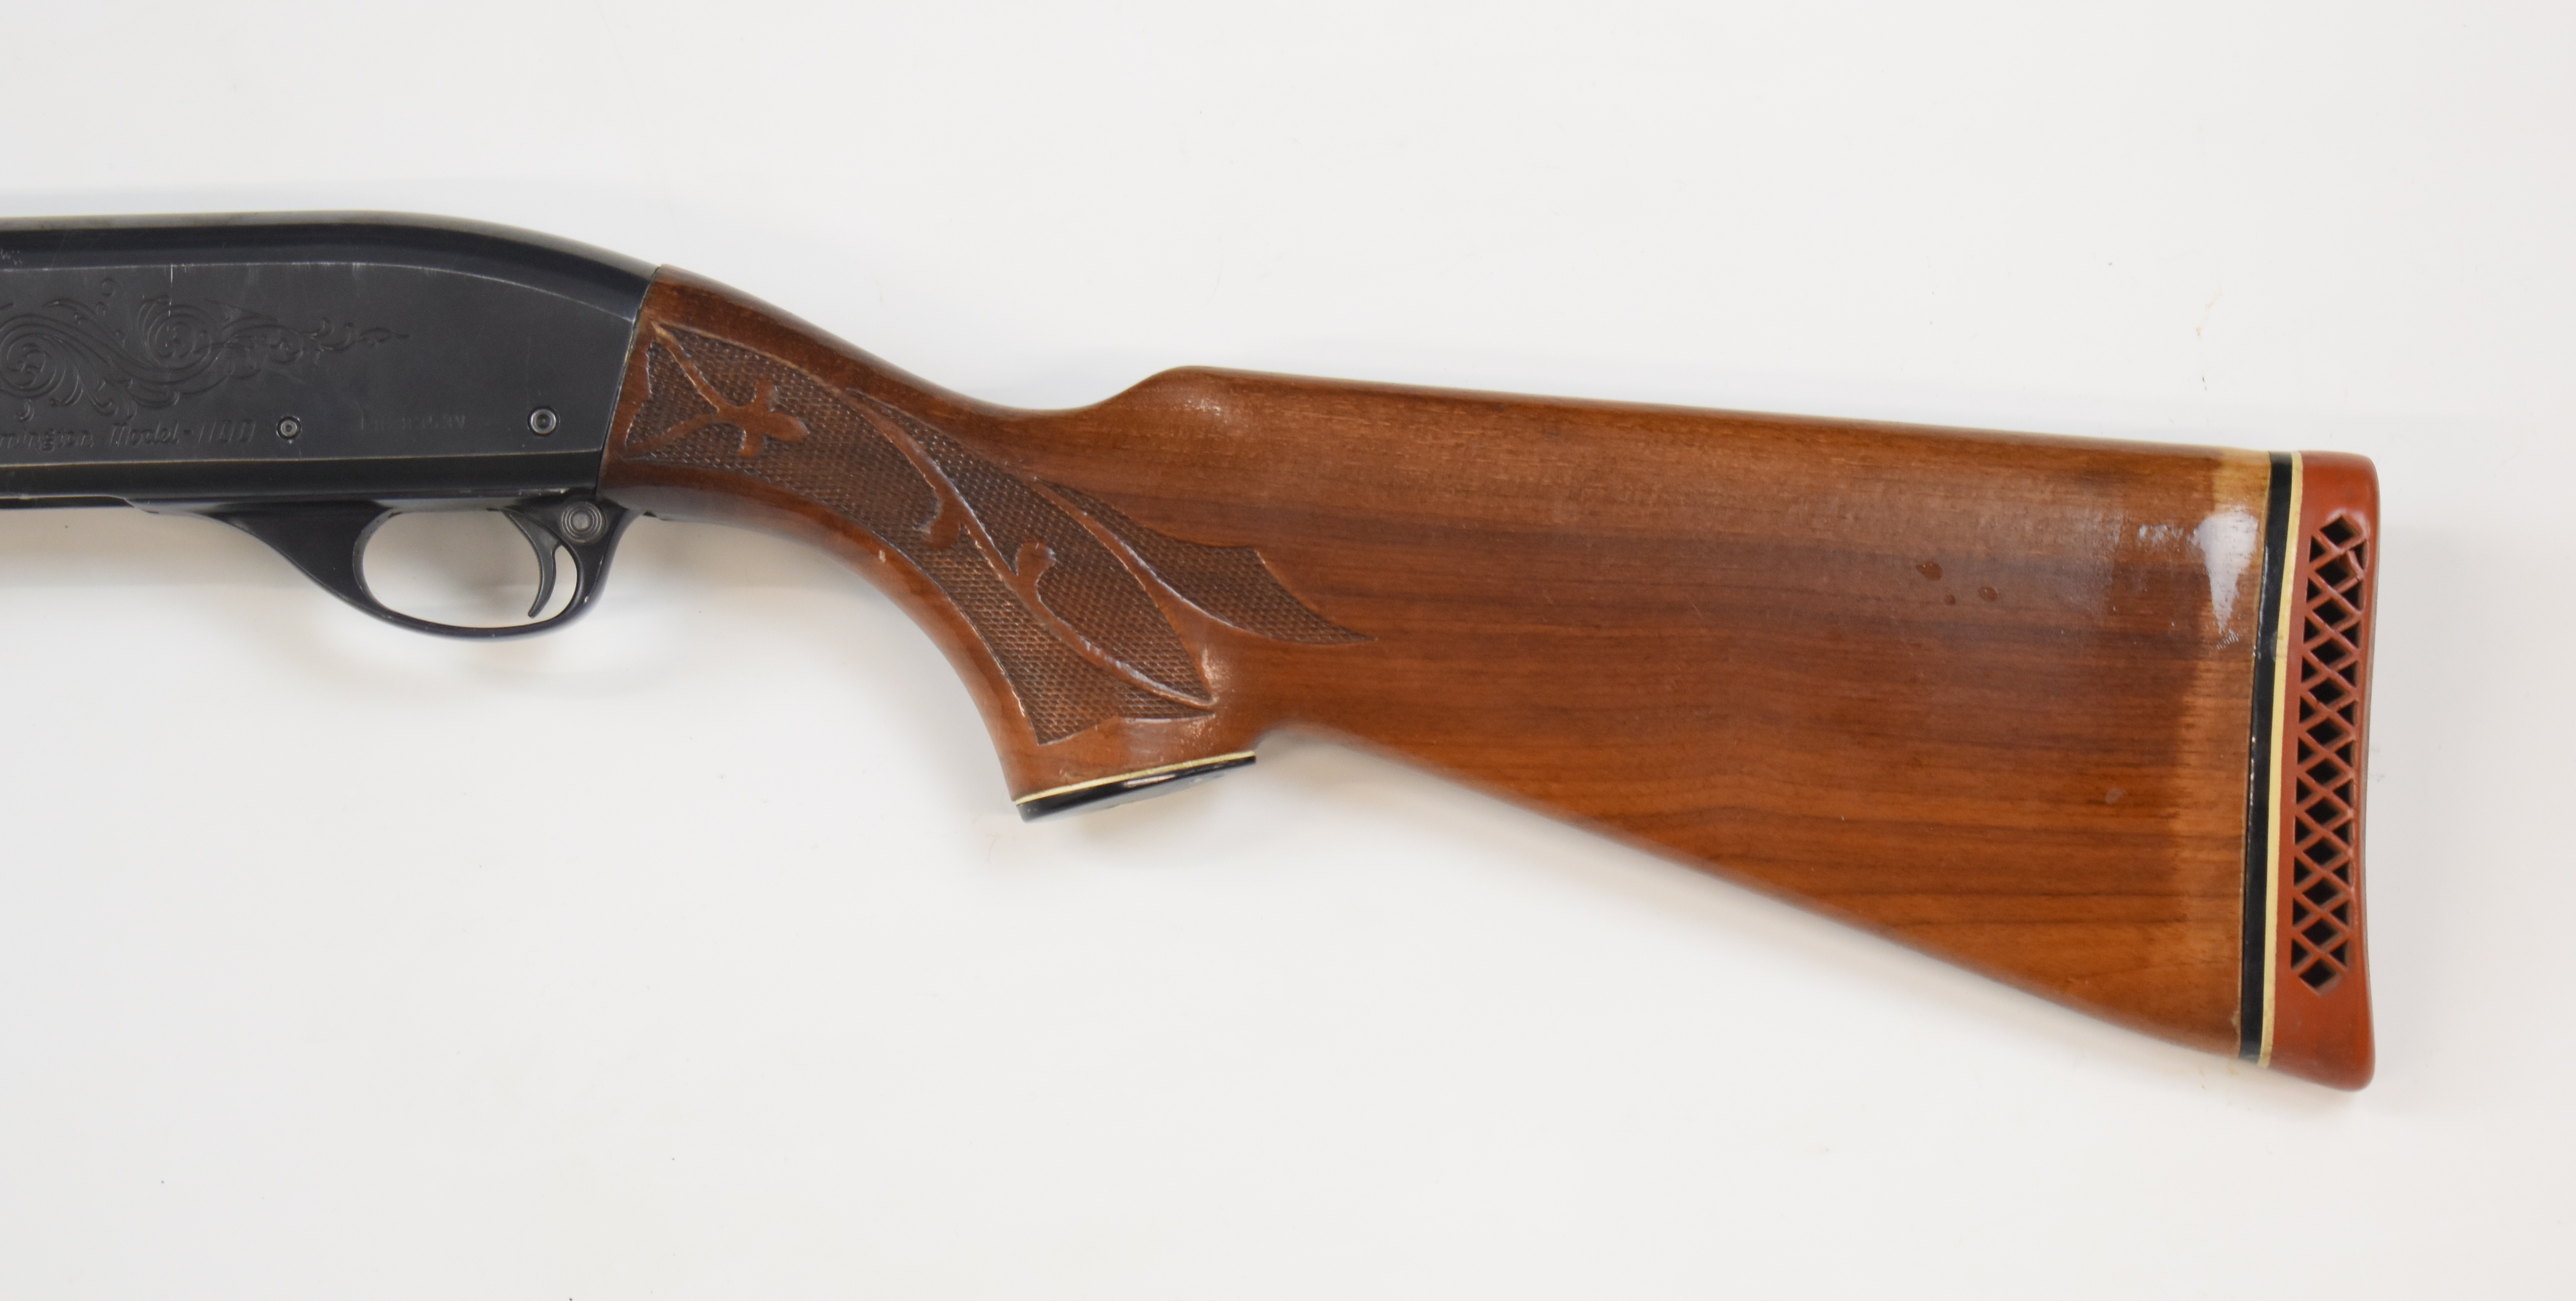 Remington Model 1100 Trap 12 bore 3-shot semi-automatic shotgun with ornately carved and chequered - Image 8 of 11